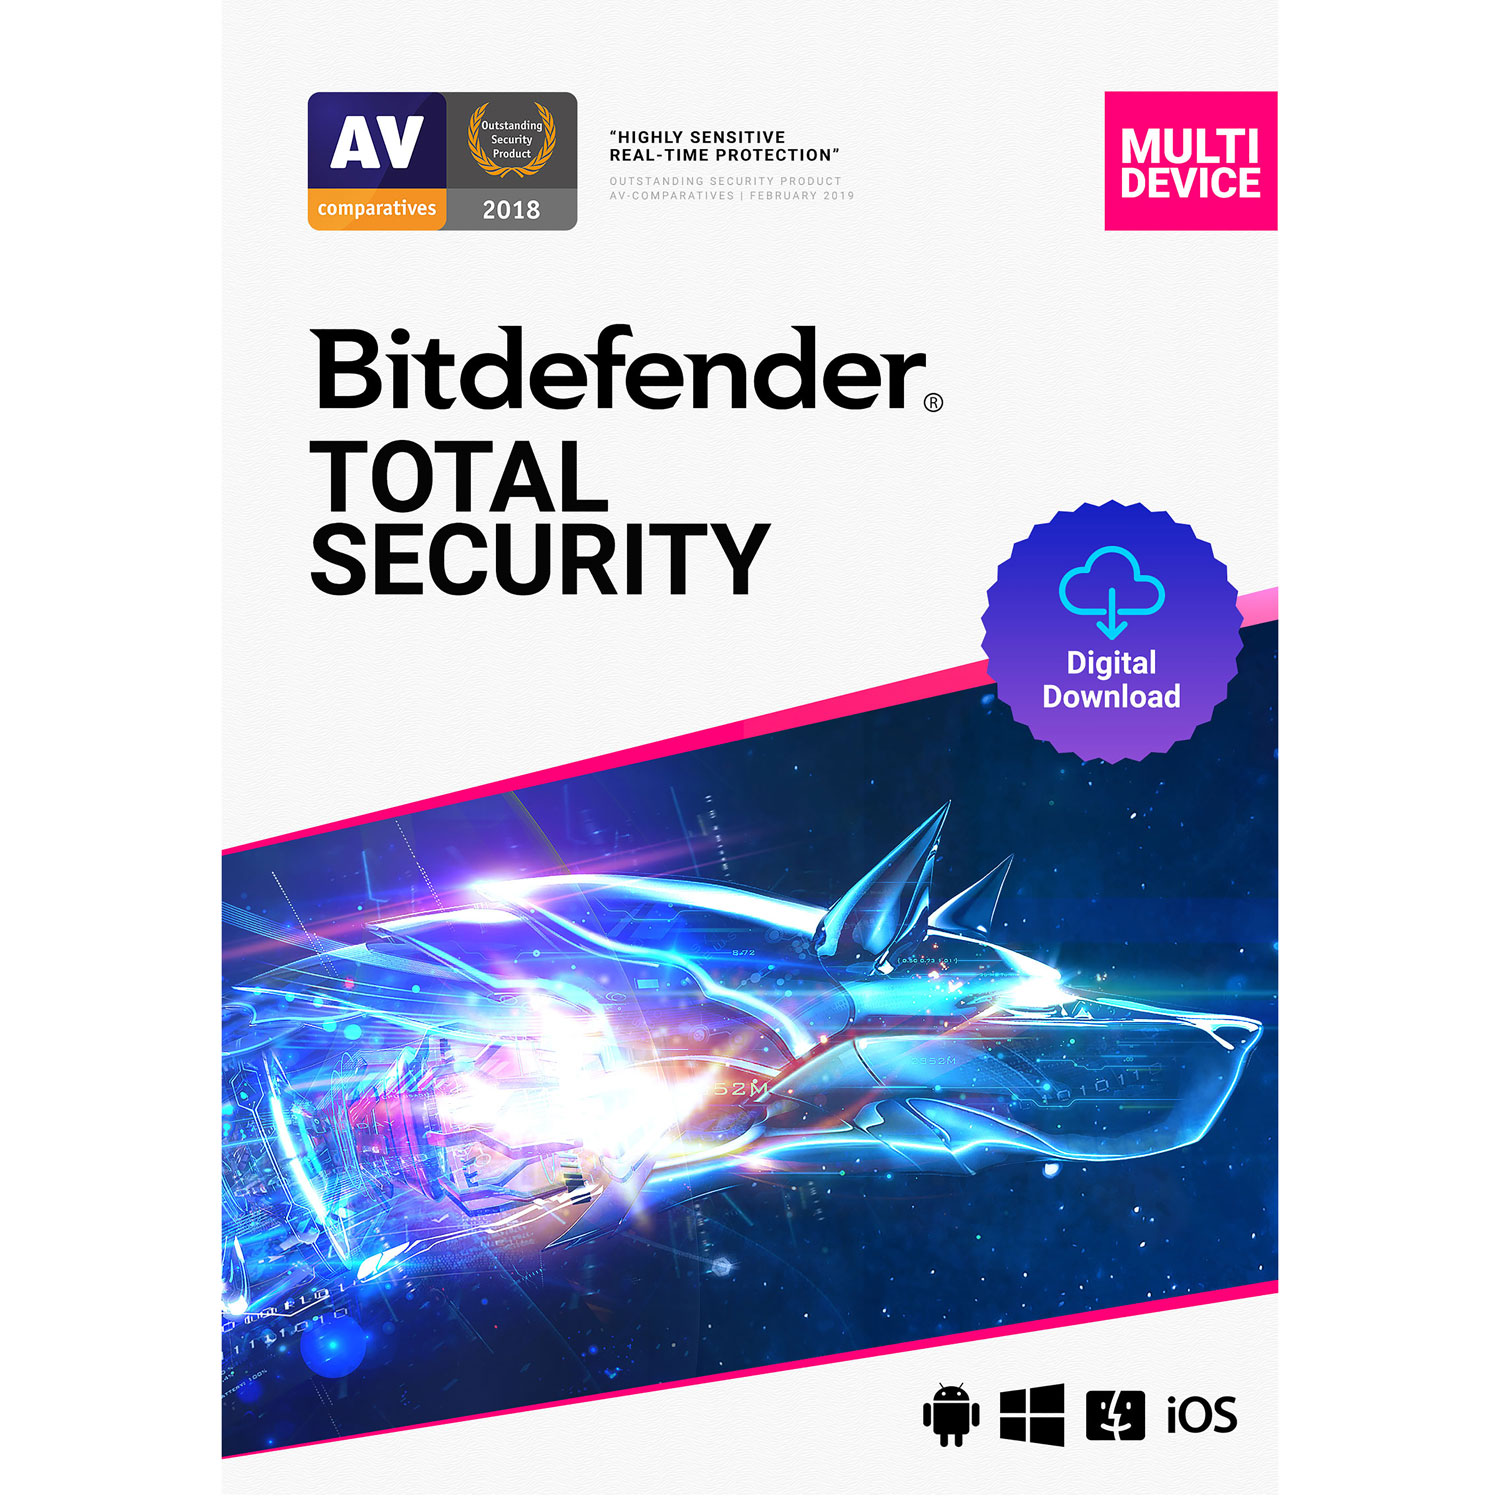 Bitdefender Total Security Bonus Edition (PC/Mac/iOS/Android) - 5 User - 3 Yr - Digital Download - Only at Best Buy